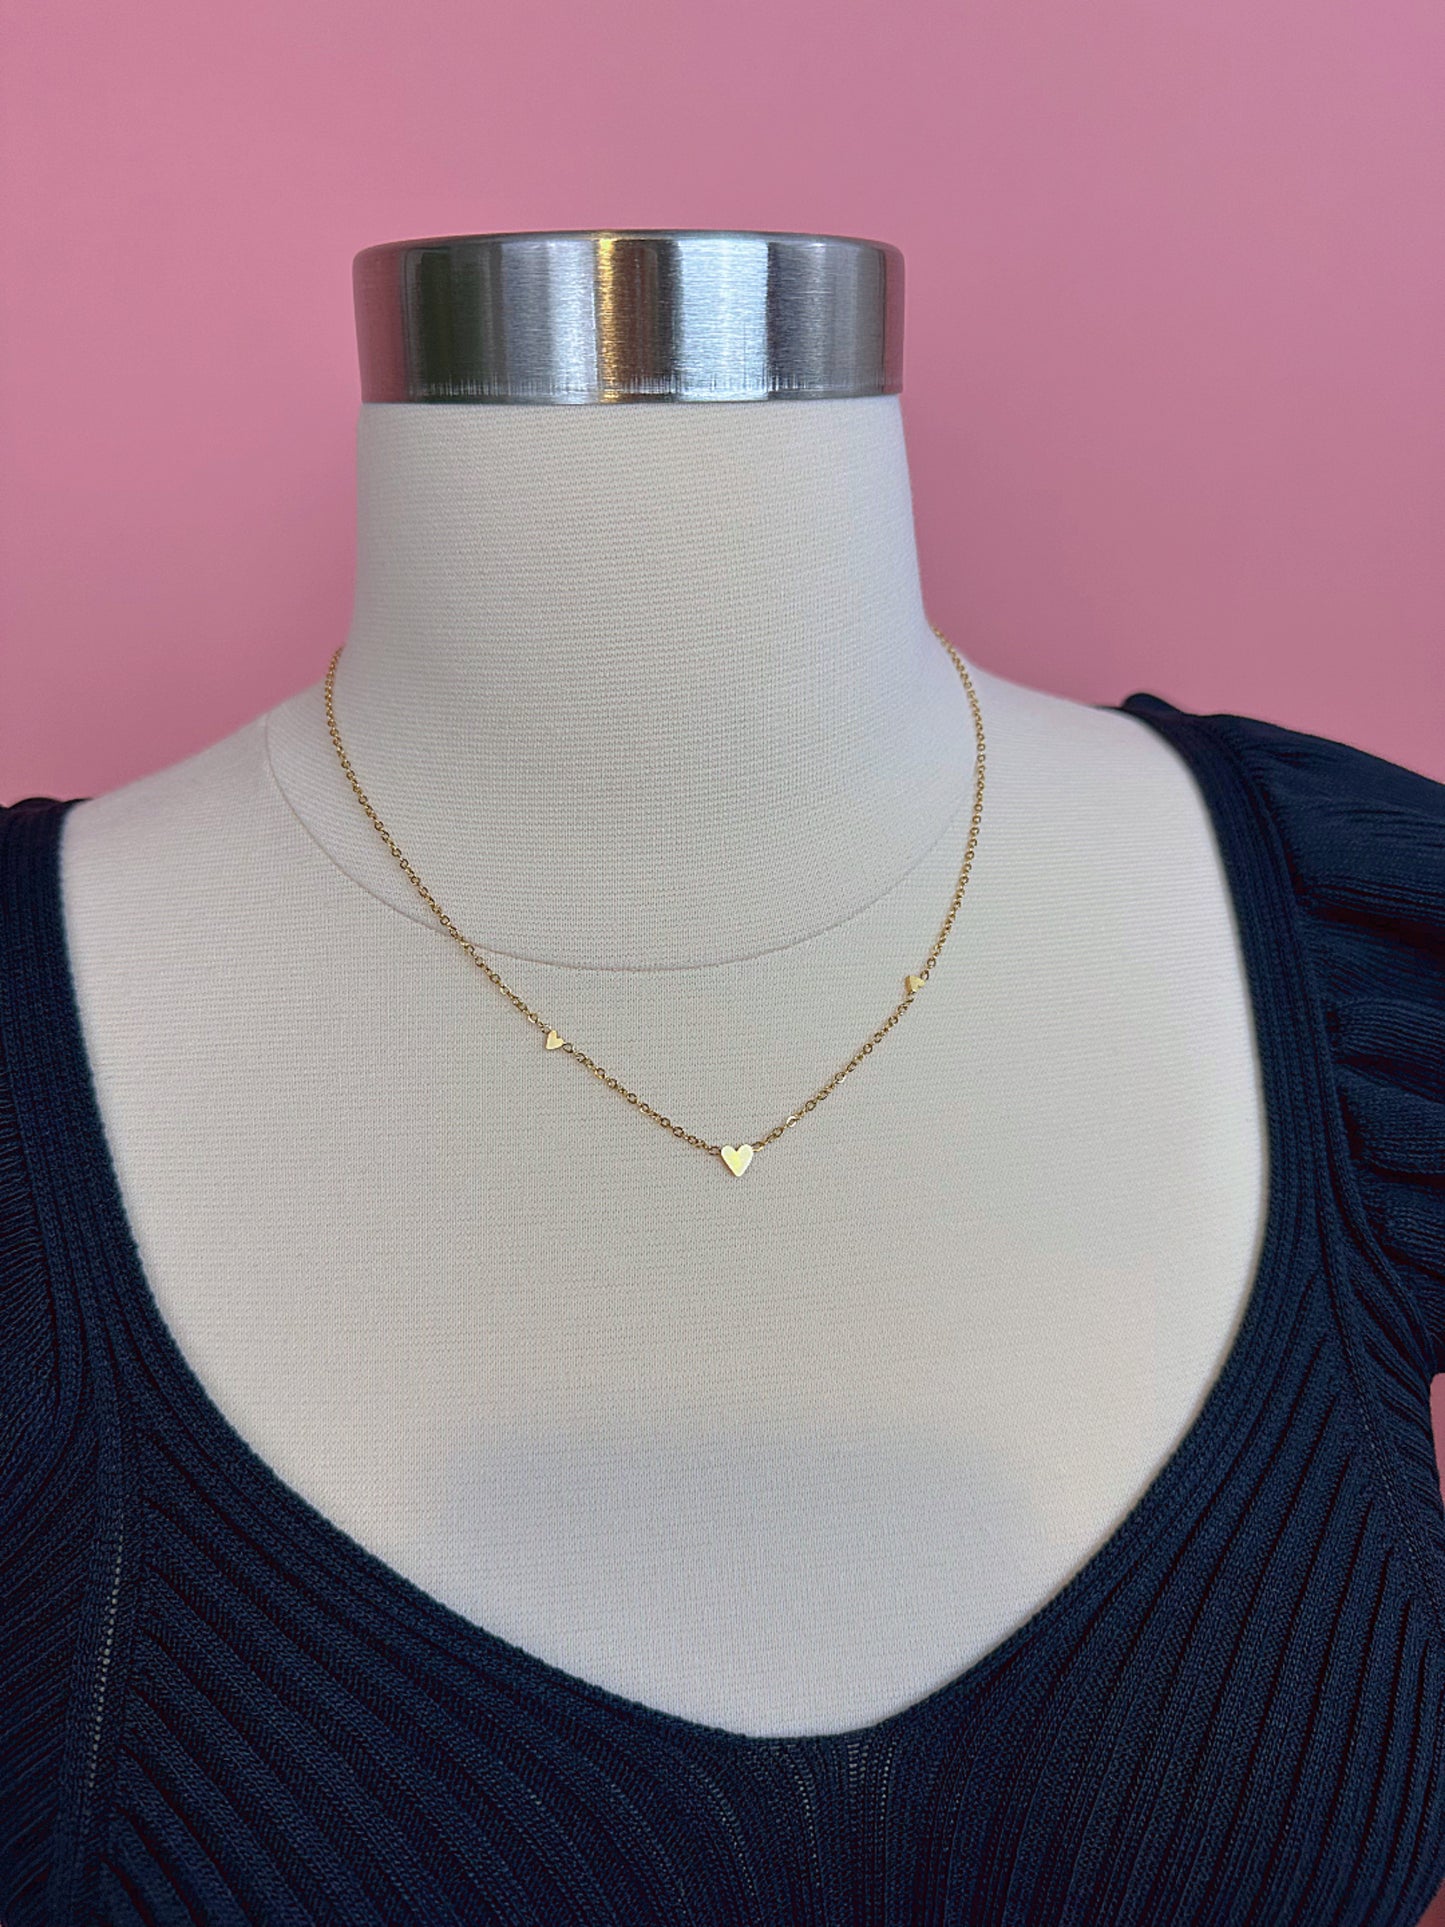 Water Proof Gold Necklaces- 6 different styles